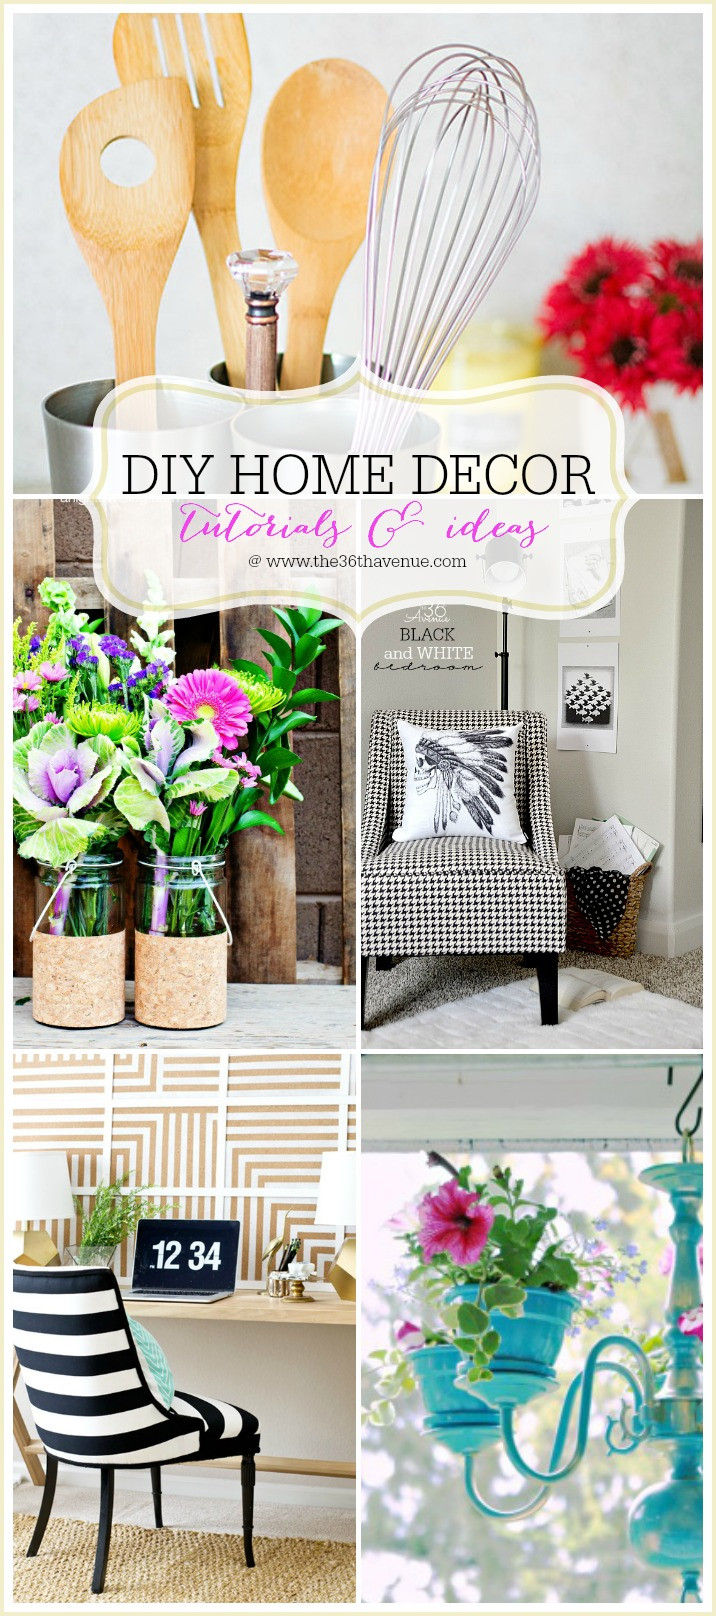 DIY Home Decore
 The 36th AVENUE Home Decor DIY Projects